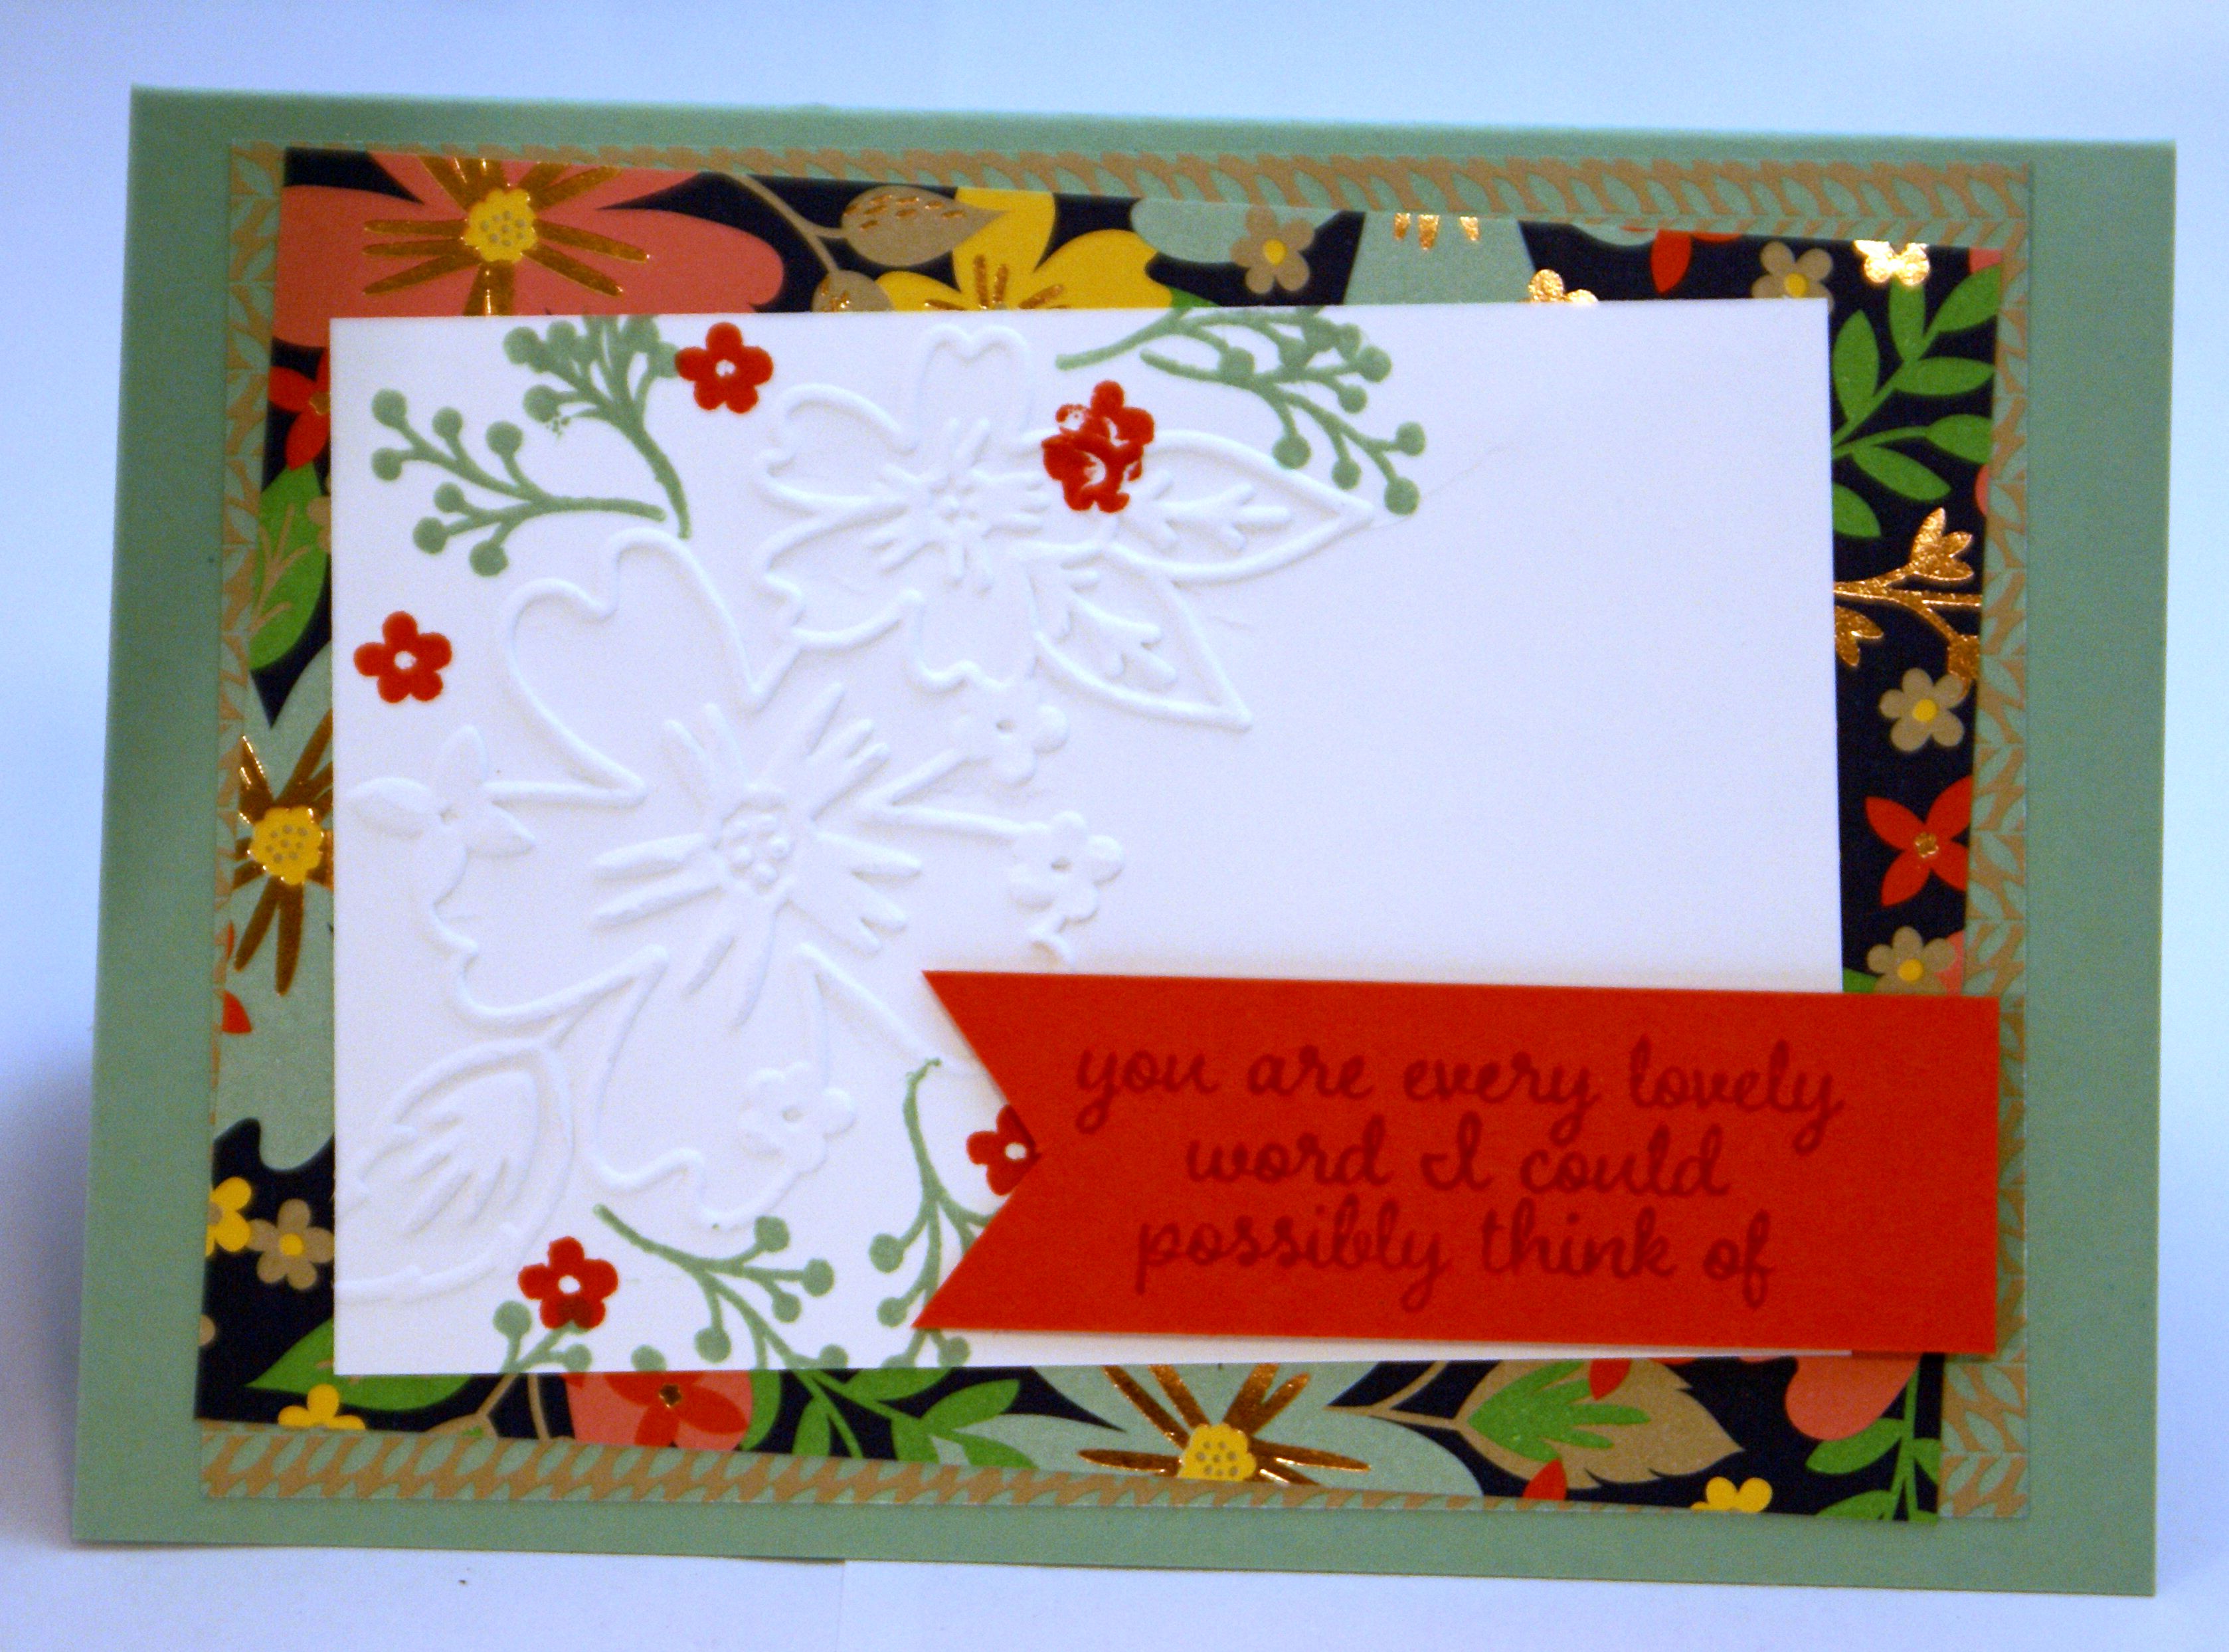 Inspiring greeting card ideas for any occasion